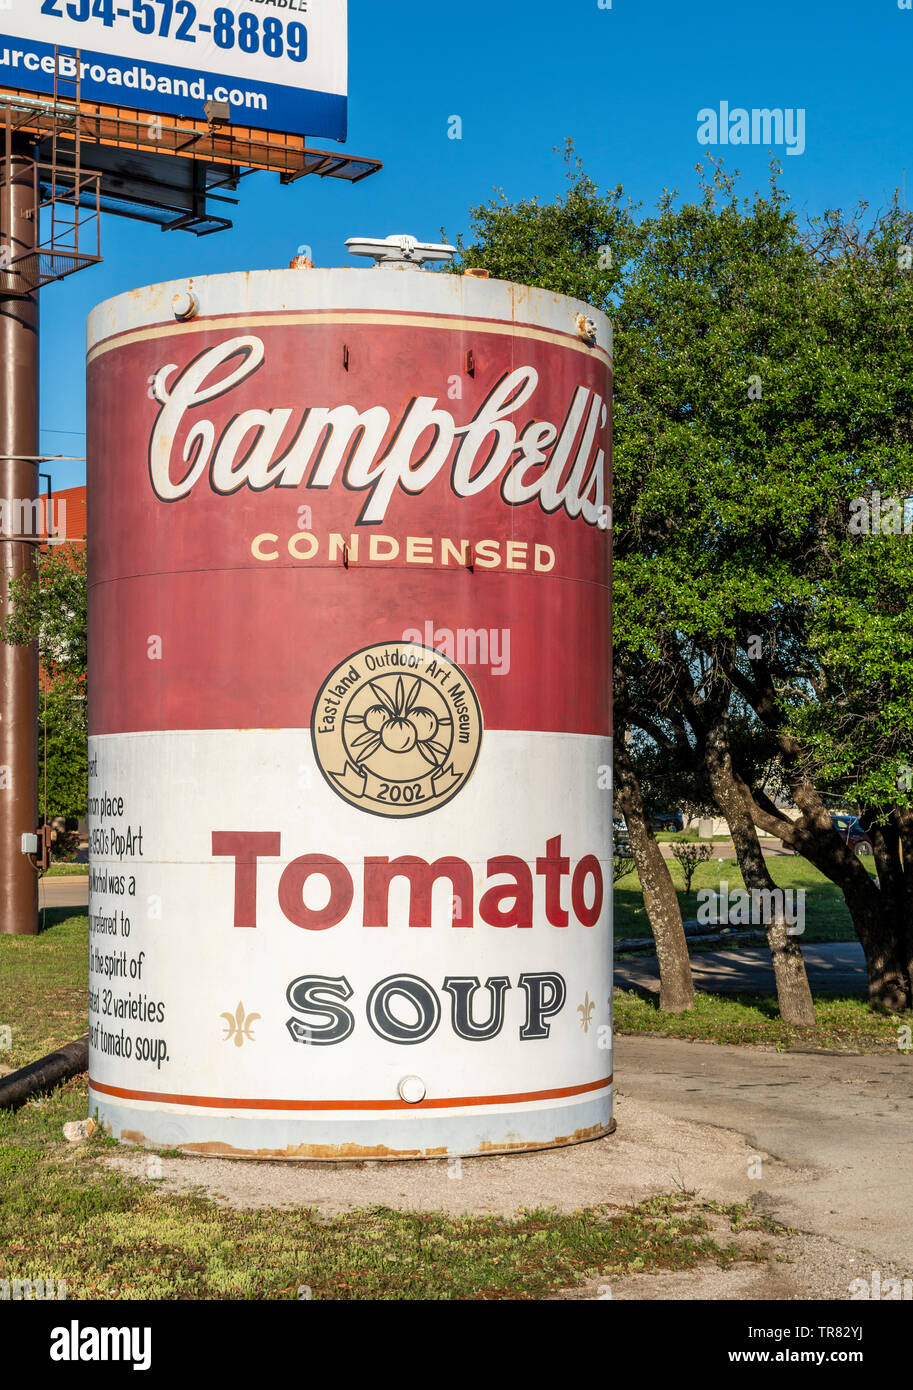 Giant Campbell’s Tomato Soup can, outdoor art museum featuring replicas of famous artworks, Eastland, Texas, USA. Stock Photo